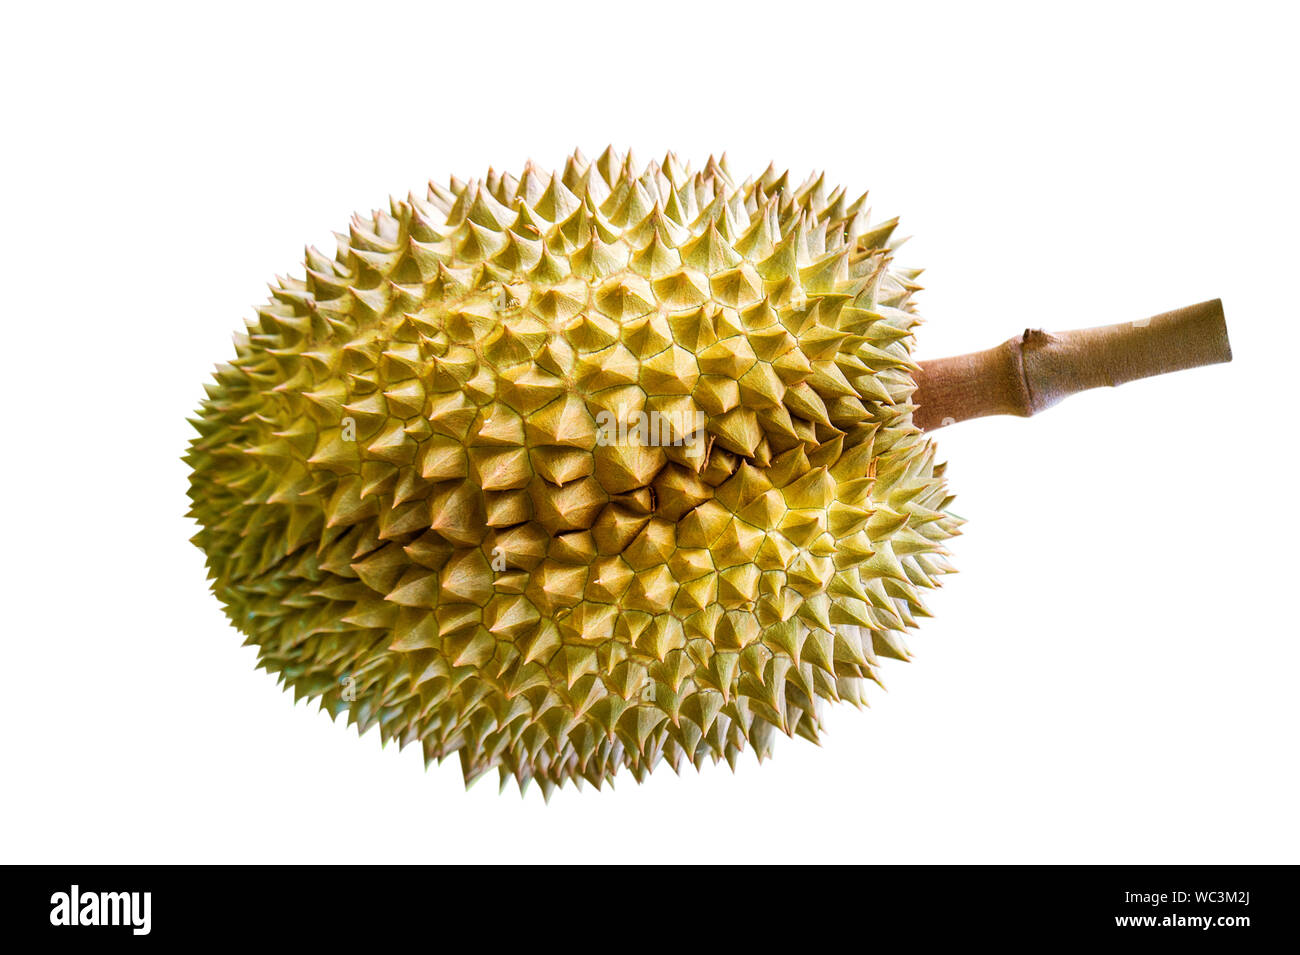 Close-up Of Spiky Fruit Against White Background Stock Photo